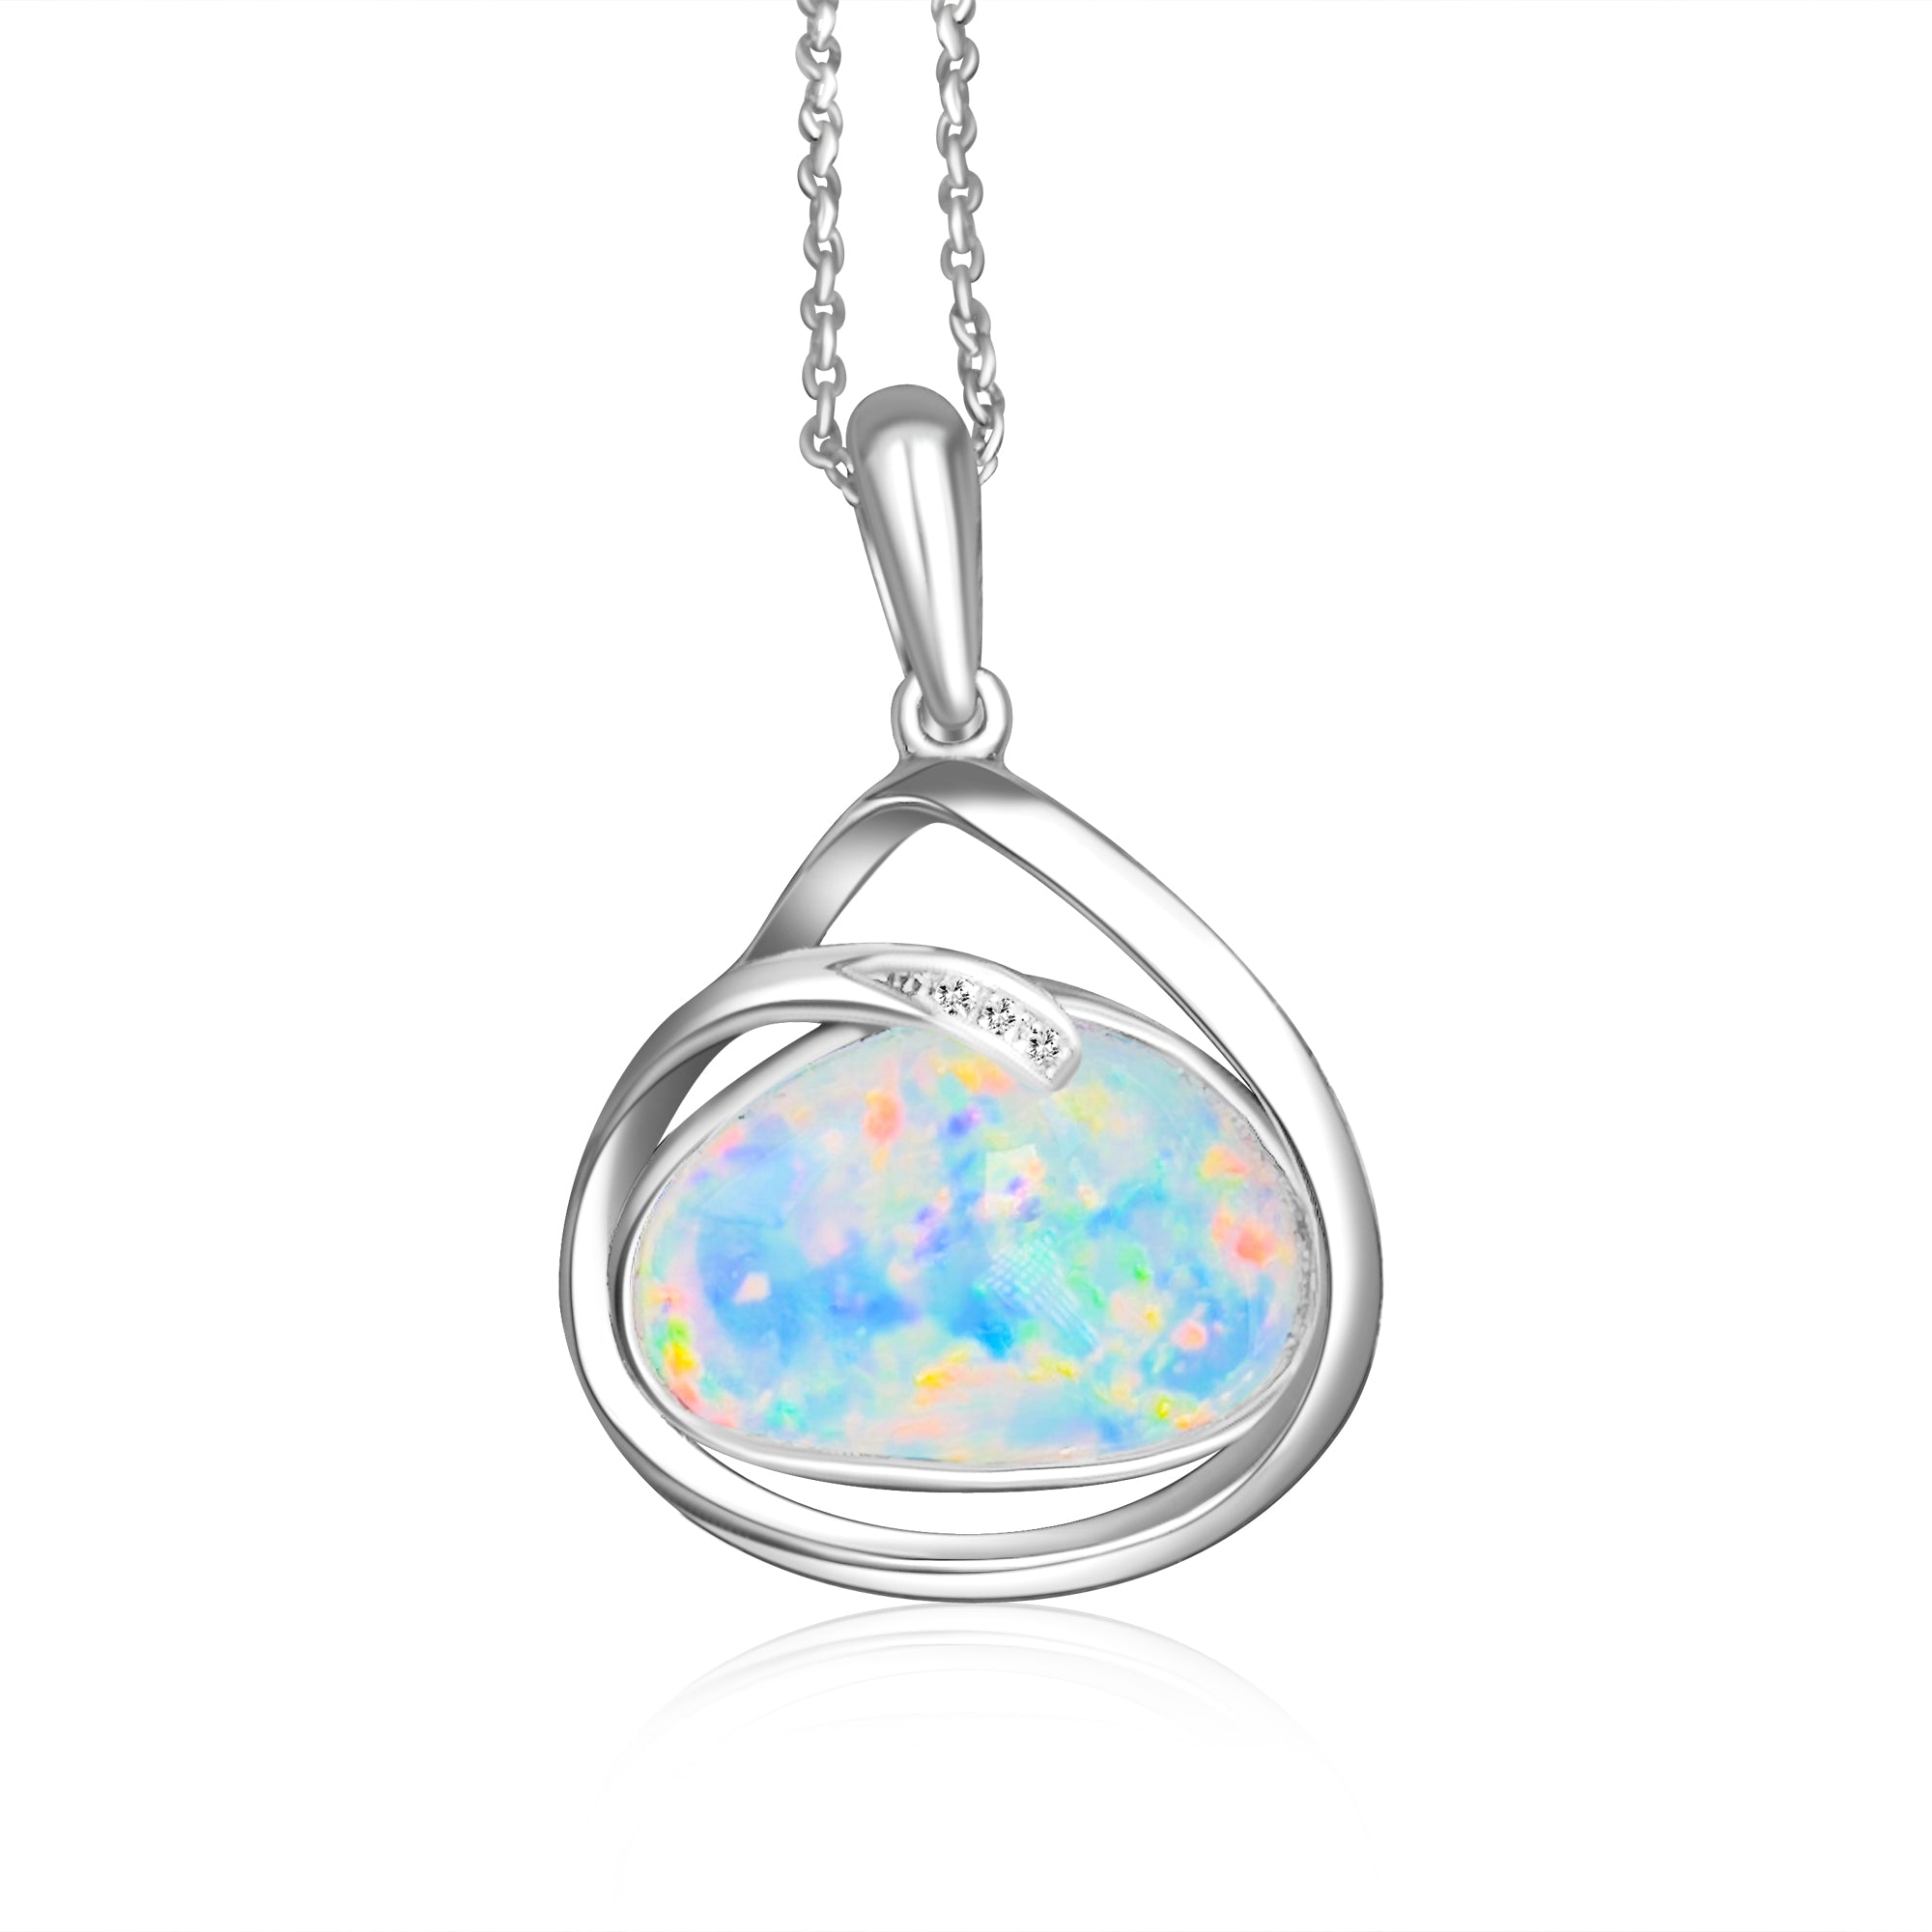 18kt White Gold pendant with one 2.3ct Crystal Opal - Masterpiece Jewellery Opal & Gems Sydney Australia | Online Shop